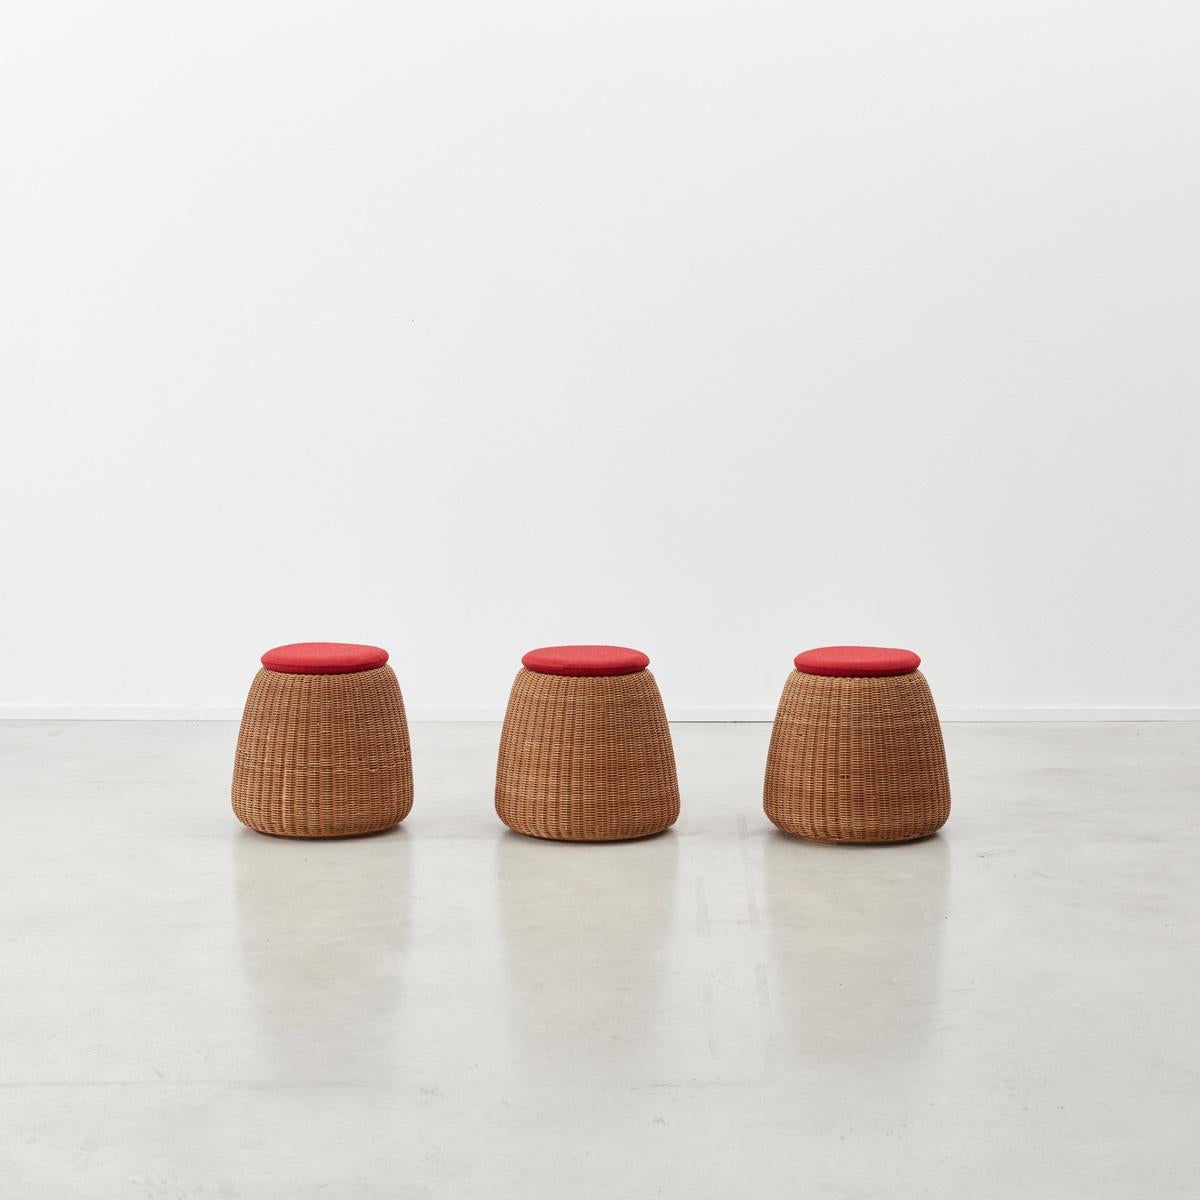 Braided rattan model S301 stool designed by Isamu Kenmochi (1912–1971). Original circular cushion in red woollen cloth, circa 1962. From the literature:’ Modern Japanese: Retrospective Kenmochi Isamu’ 2004, pp94 – 95 and ‘Made in Japan 1950s–1960s’